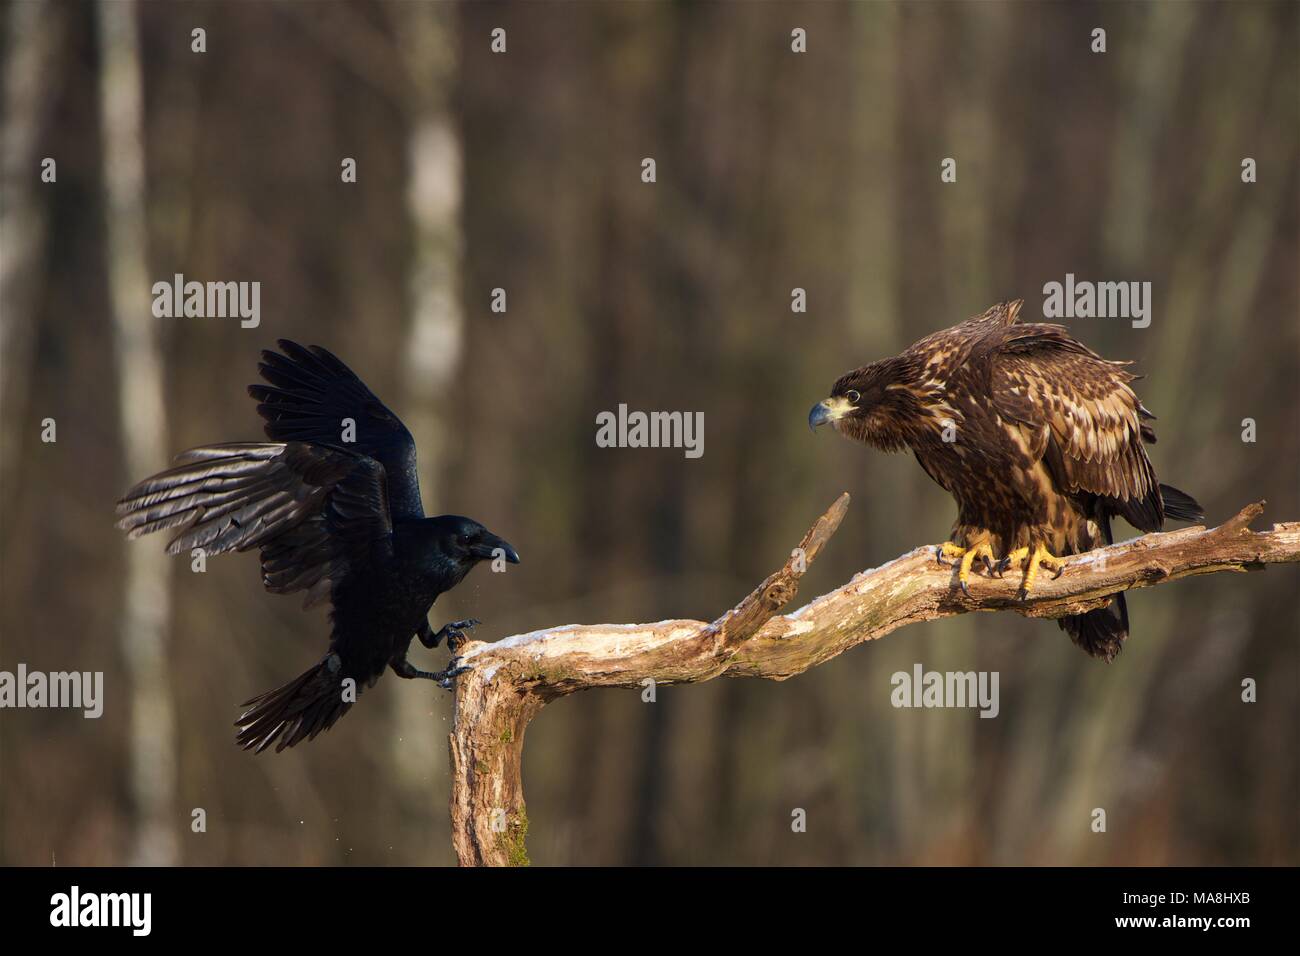 Large Raven pestering a perched White-tailed Sea Eagle Stock Photo